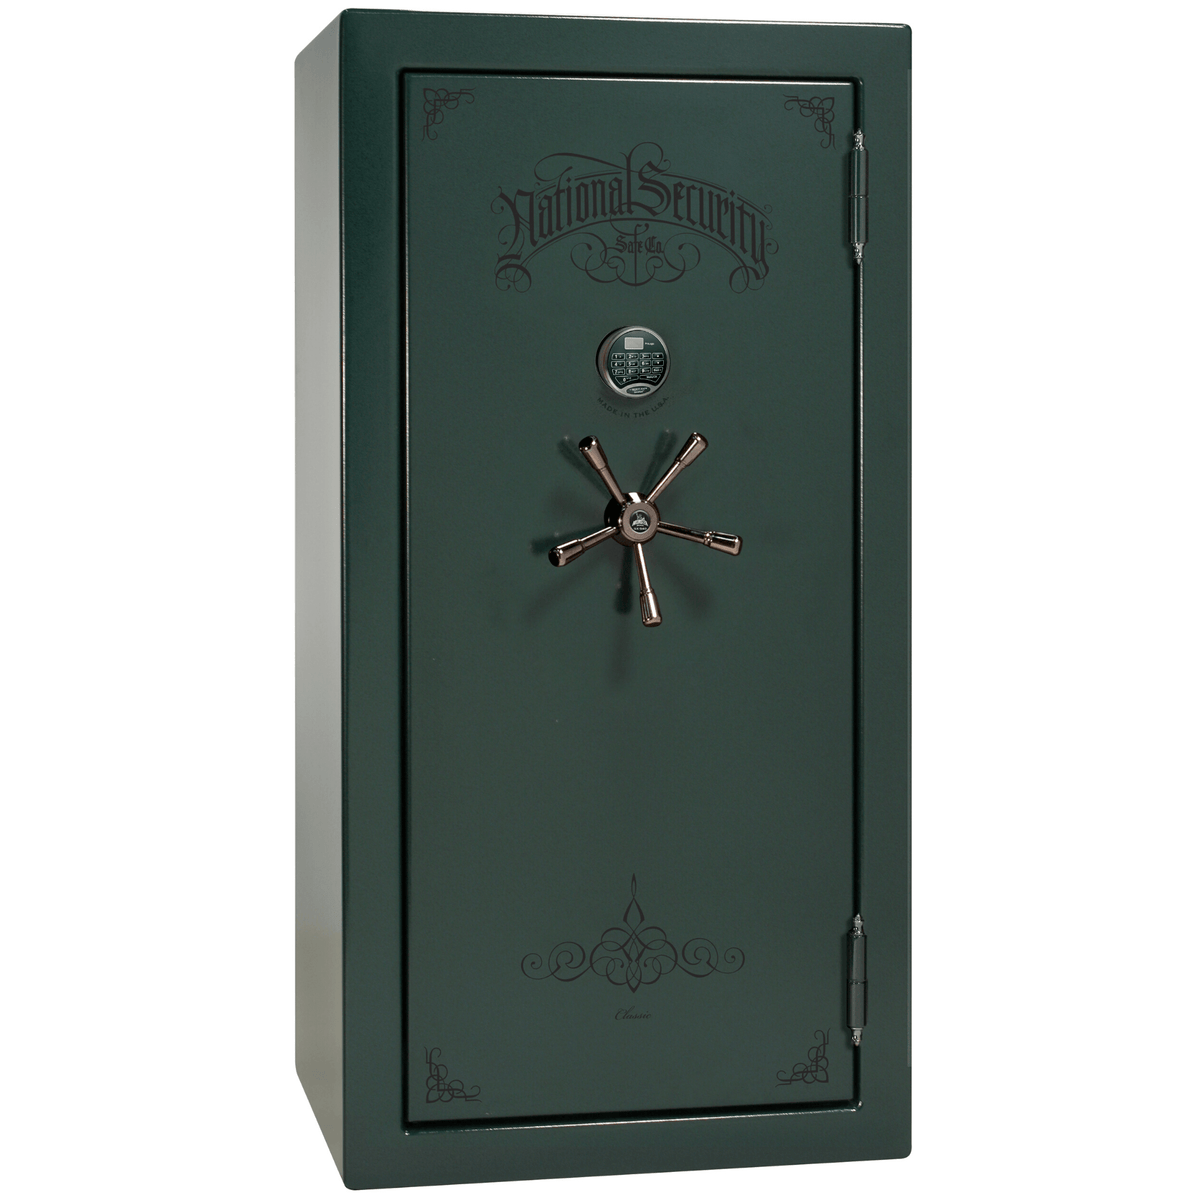 Liberty Safe Classic Plus 25 in Green Marble with Black Chrome Electronic Lock, closed door.